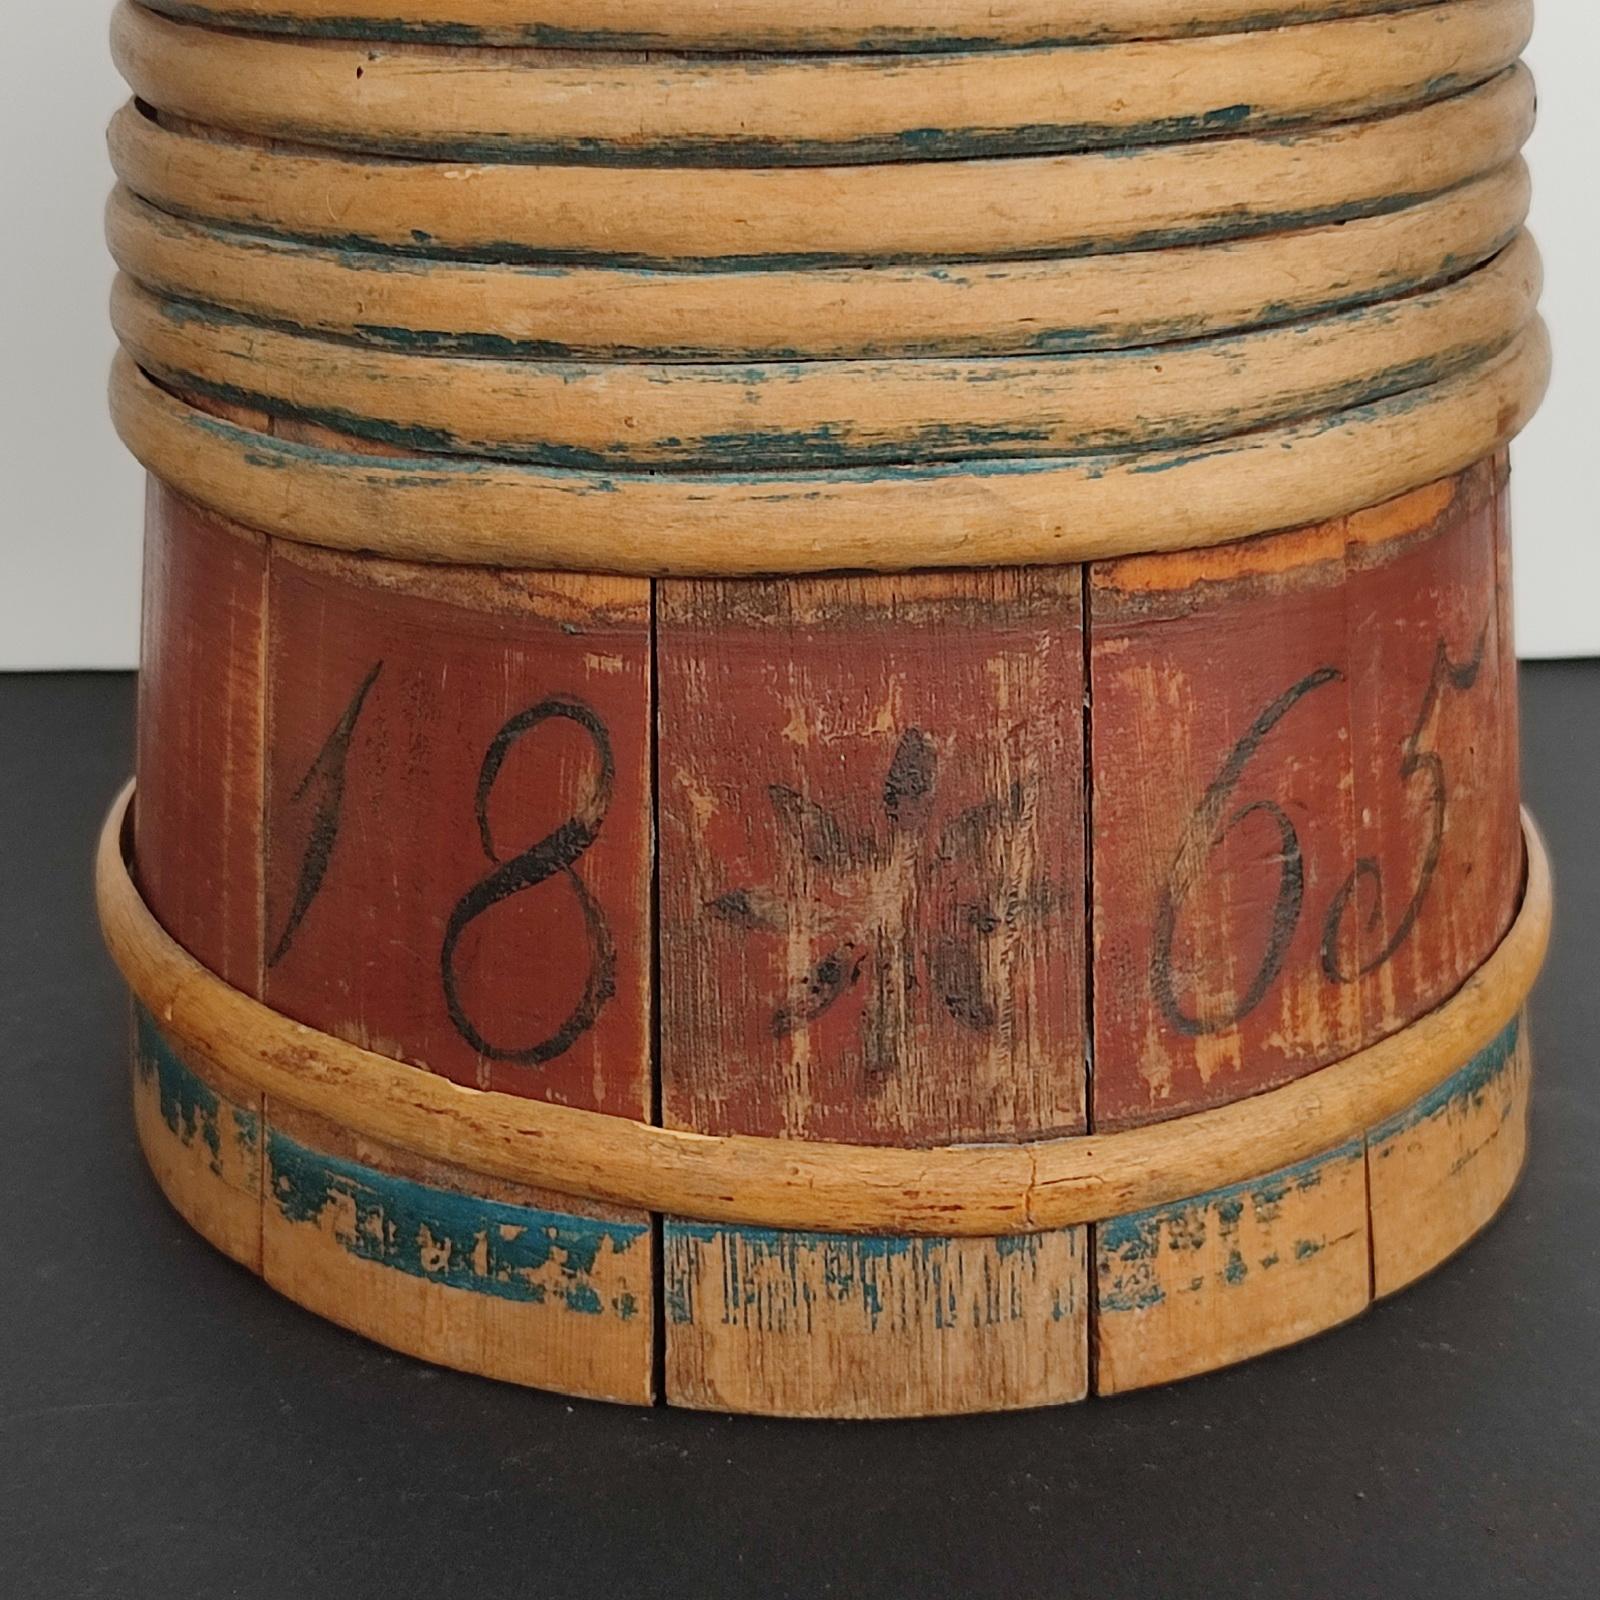 19th century Norwegian wood tankard painted with initials and dated 1865.
Wooden Lidded Tankard, made of staves that are held together with split-branch banding. The lids are hinged. 
Wonderful piece to add to your collection of Folk Art, early